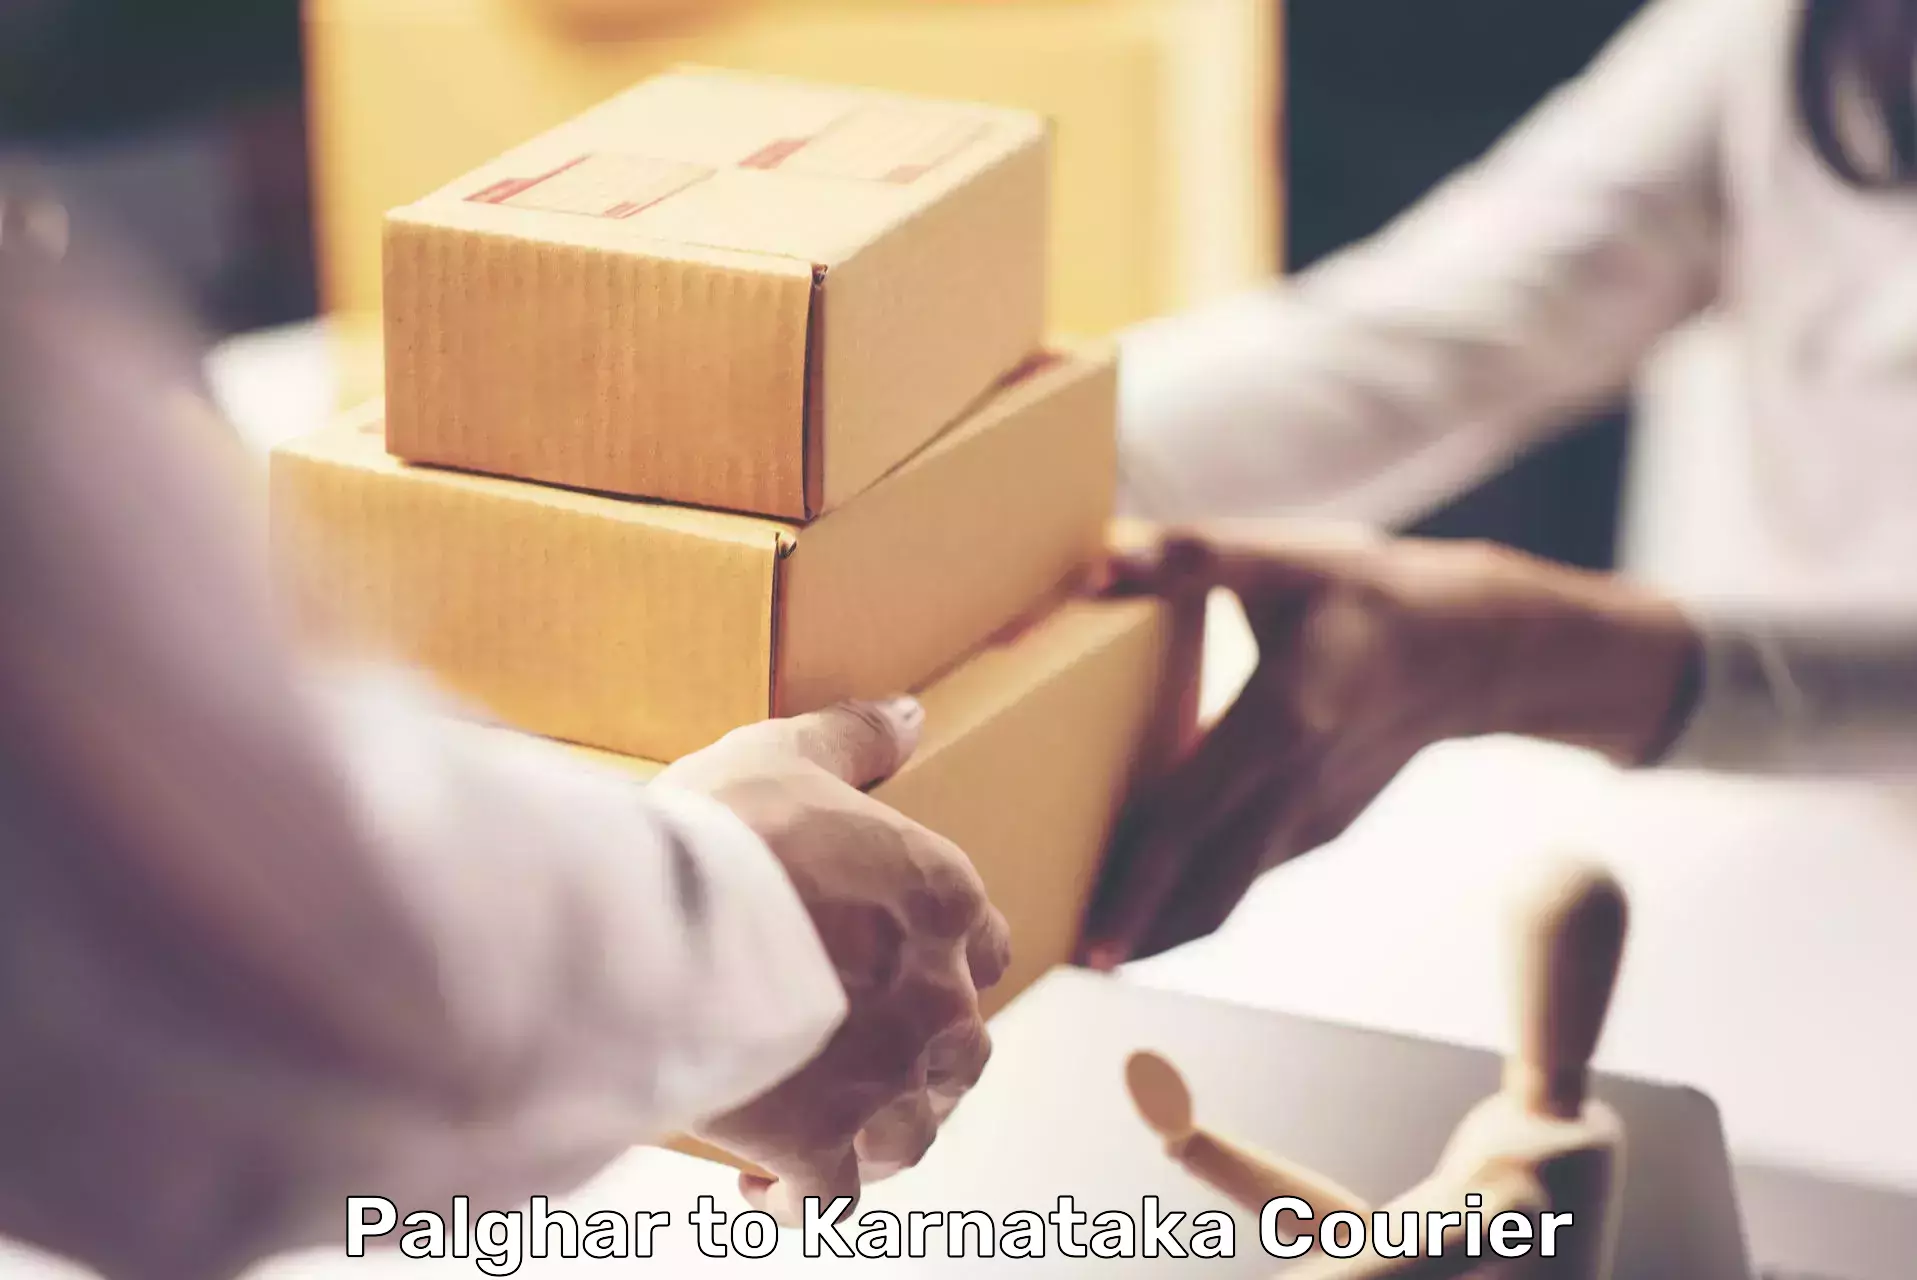 Global shipping solutions Palghar to Mysore University